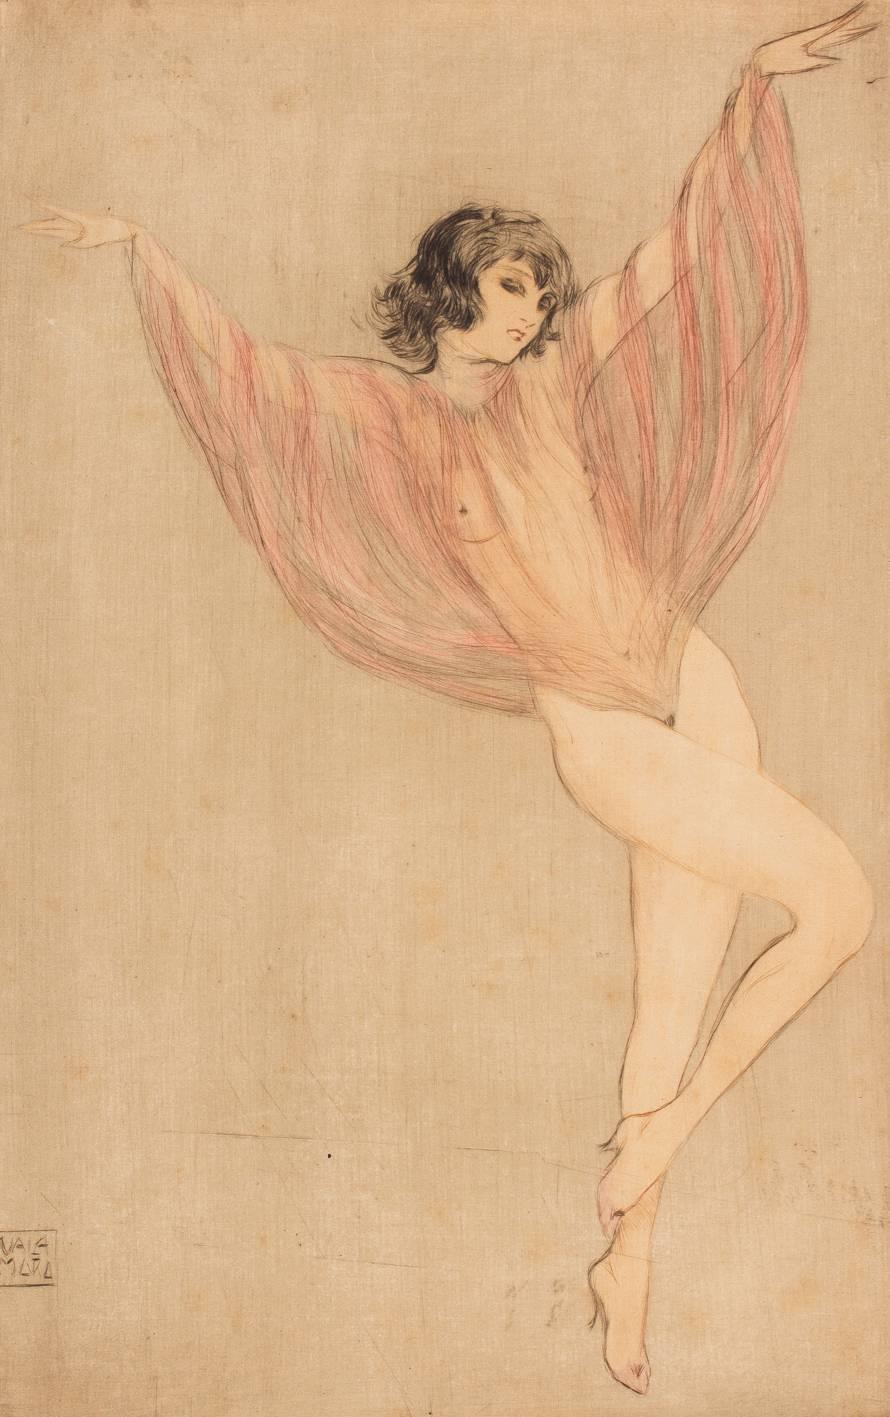 Vala Moro (1907), Vienna
Art Deco dancing nude, circa 1924
Original colored etching, pencil-signed lower right and in etching “Vala Moro”

Vala Moro (1907) was an Austrian-Hungarian dancer and artist. She lived in Vienna and was active circa